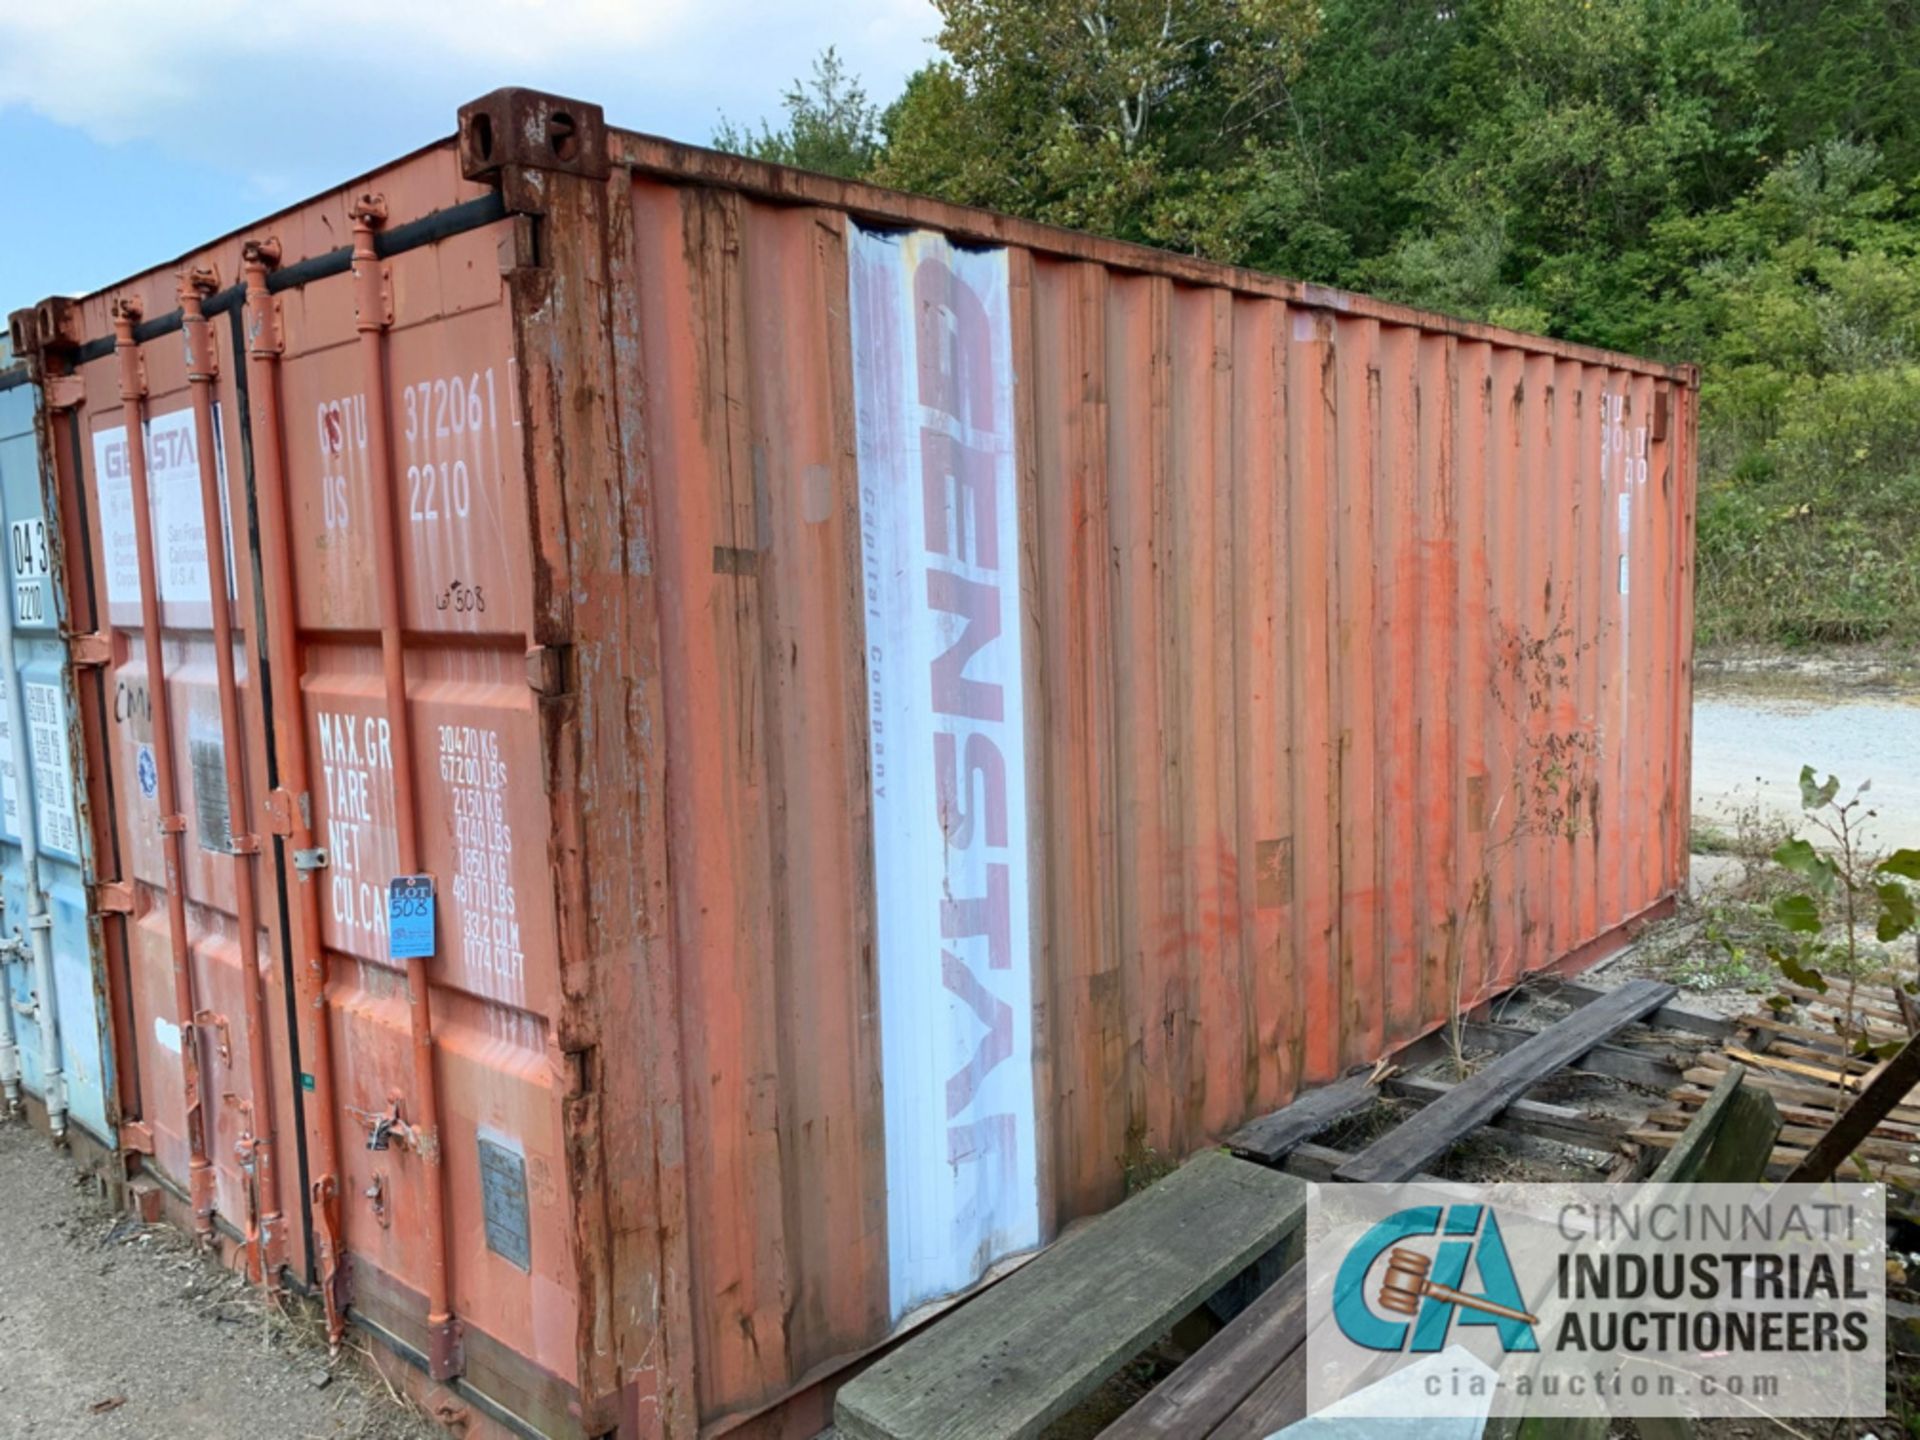 8' WIDE X 8' TALL X 20' LONG STEEL SHIPPING CONTAINER (ORANGE) ***LOCATED IN MILFORD, OHIO***